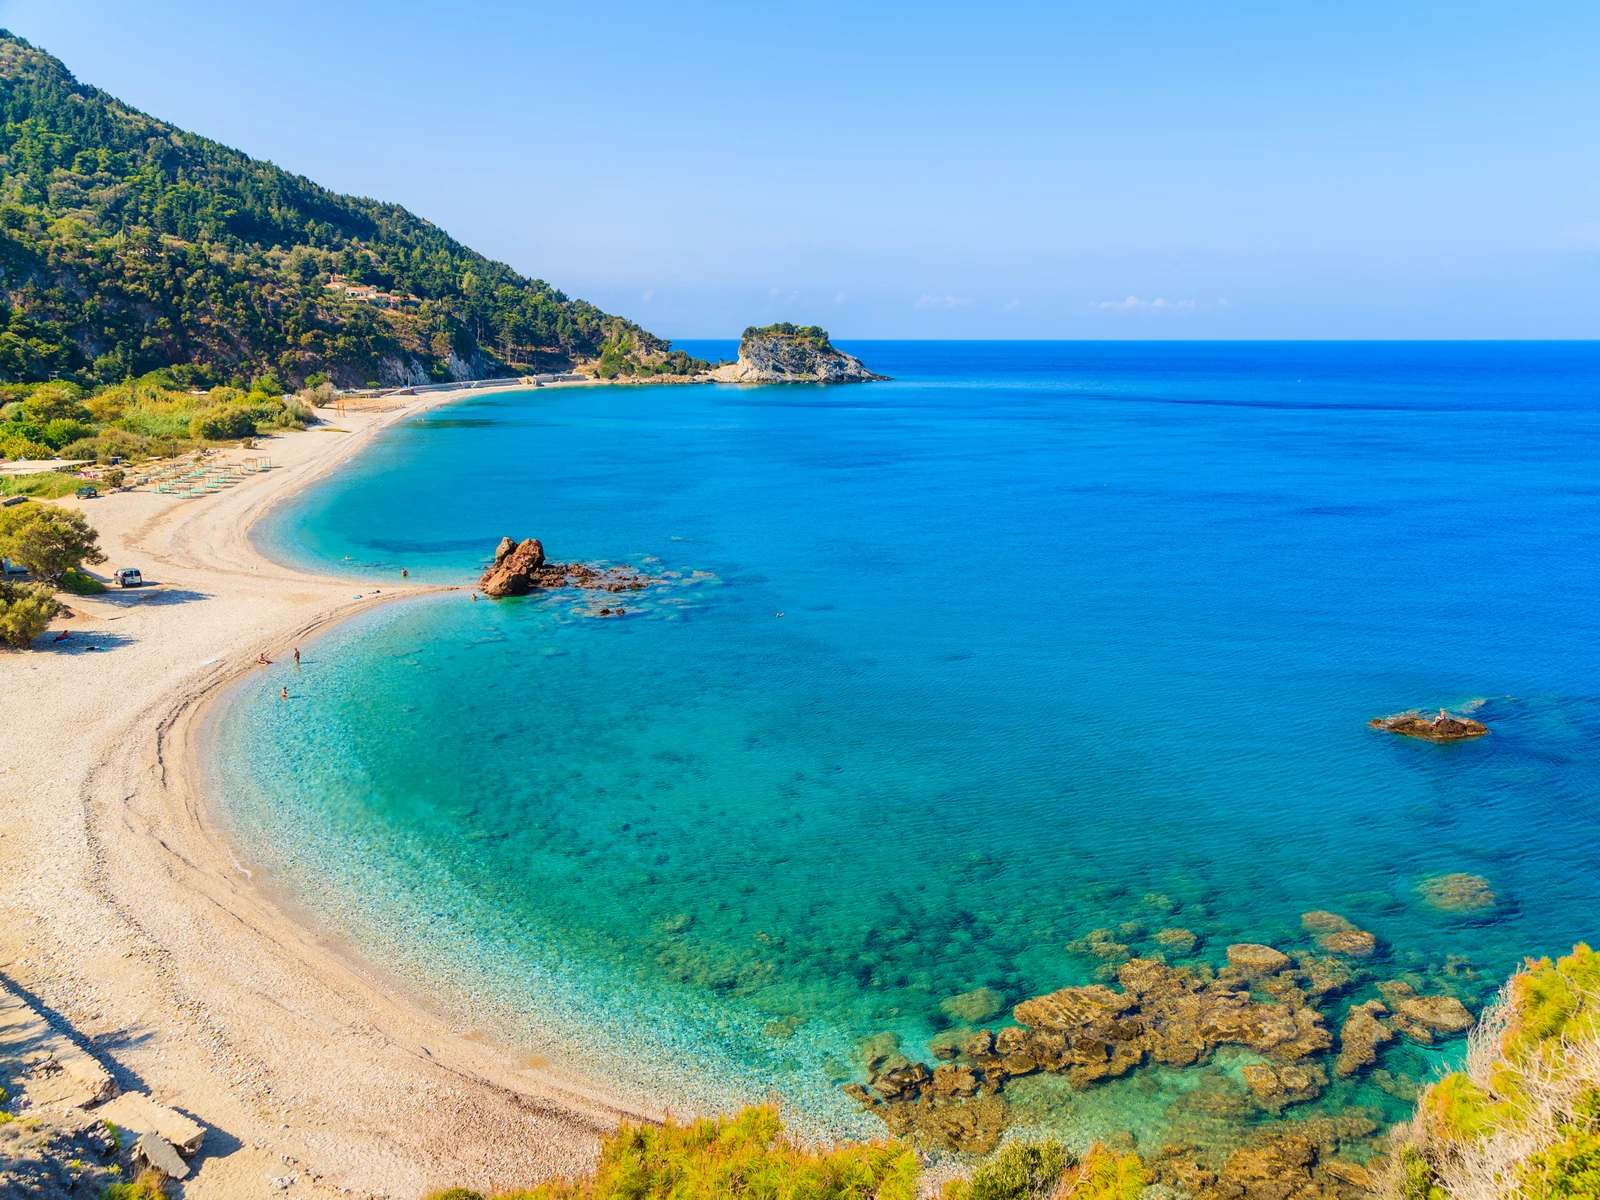 Potami, Samos, one of the best beaches in Greece, pictured from the top of the hillside